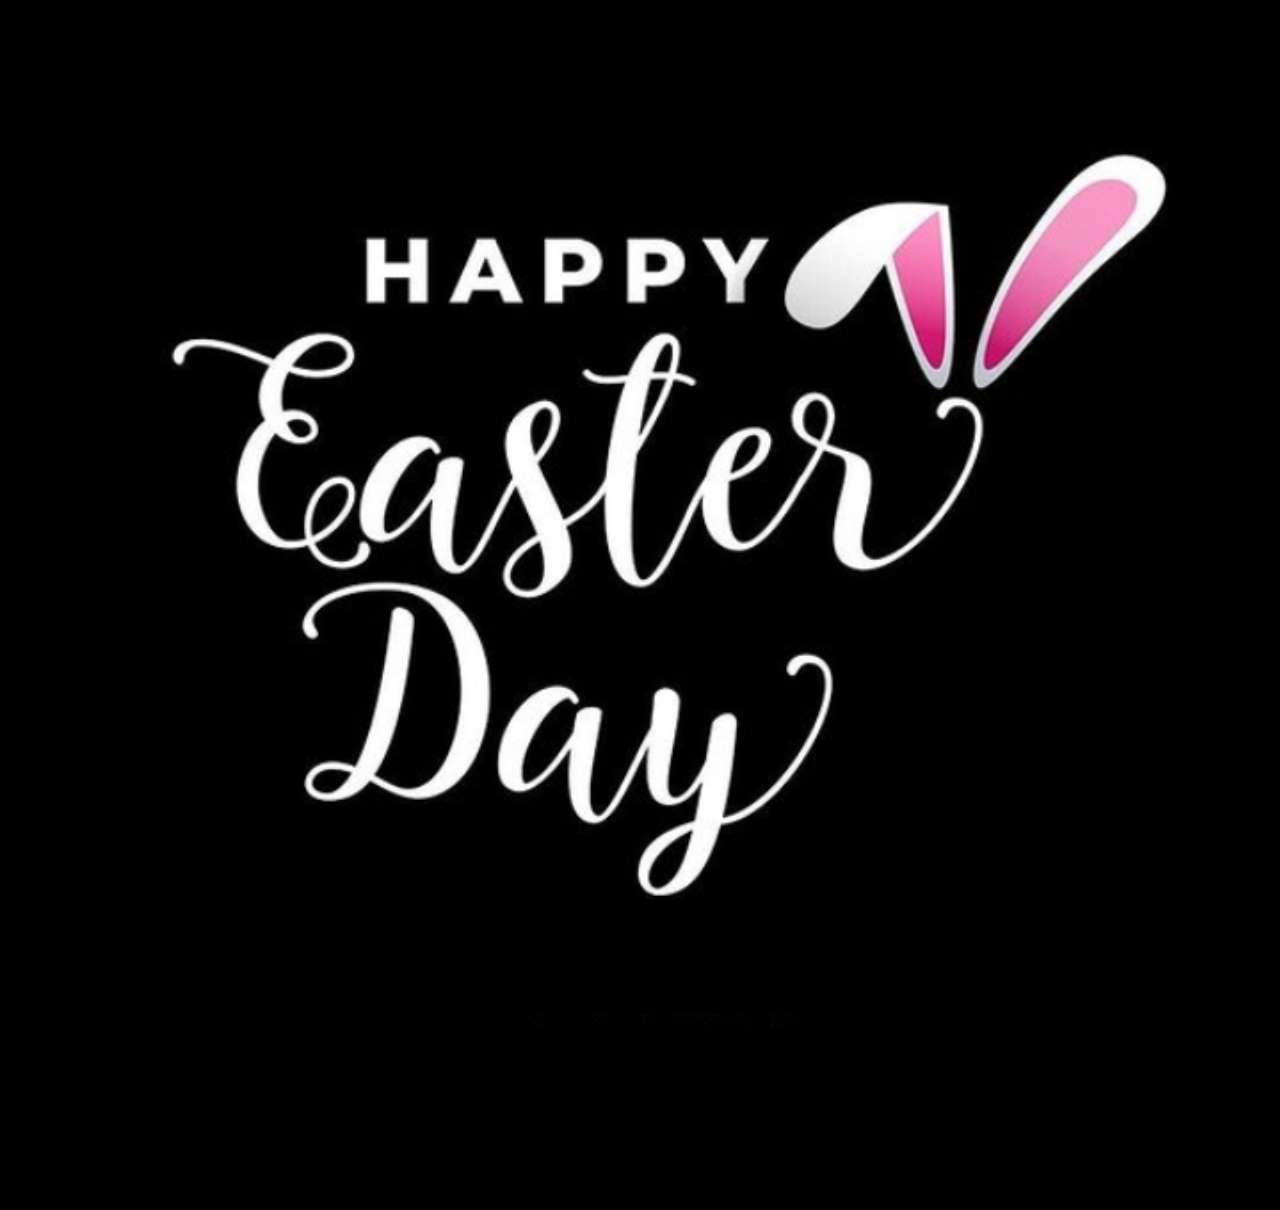 https://videosupdates.com/happy-easter-day-wishes/